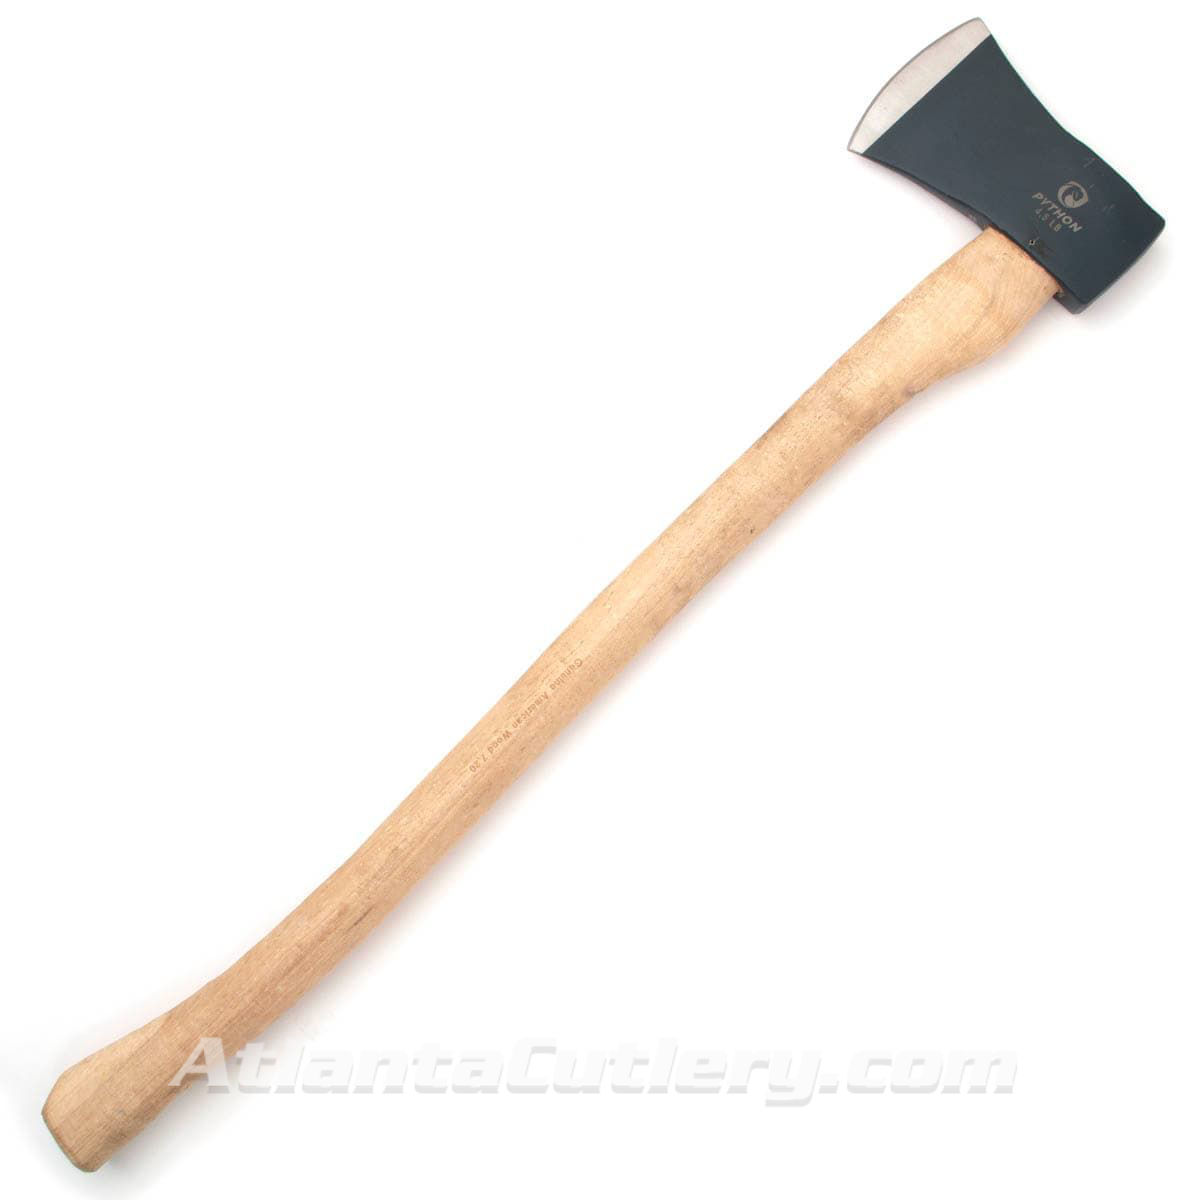 Python Felling Axe with Drop forged 1055 high carbon steel blade and hickory handle